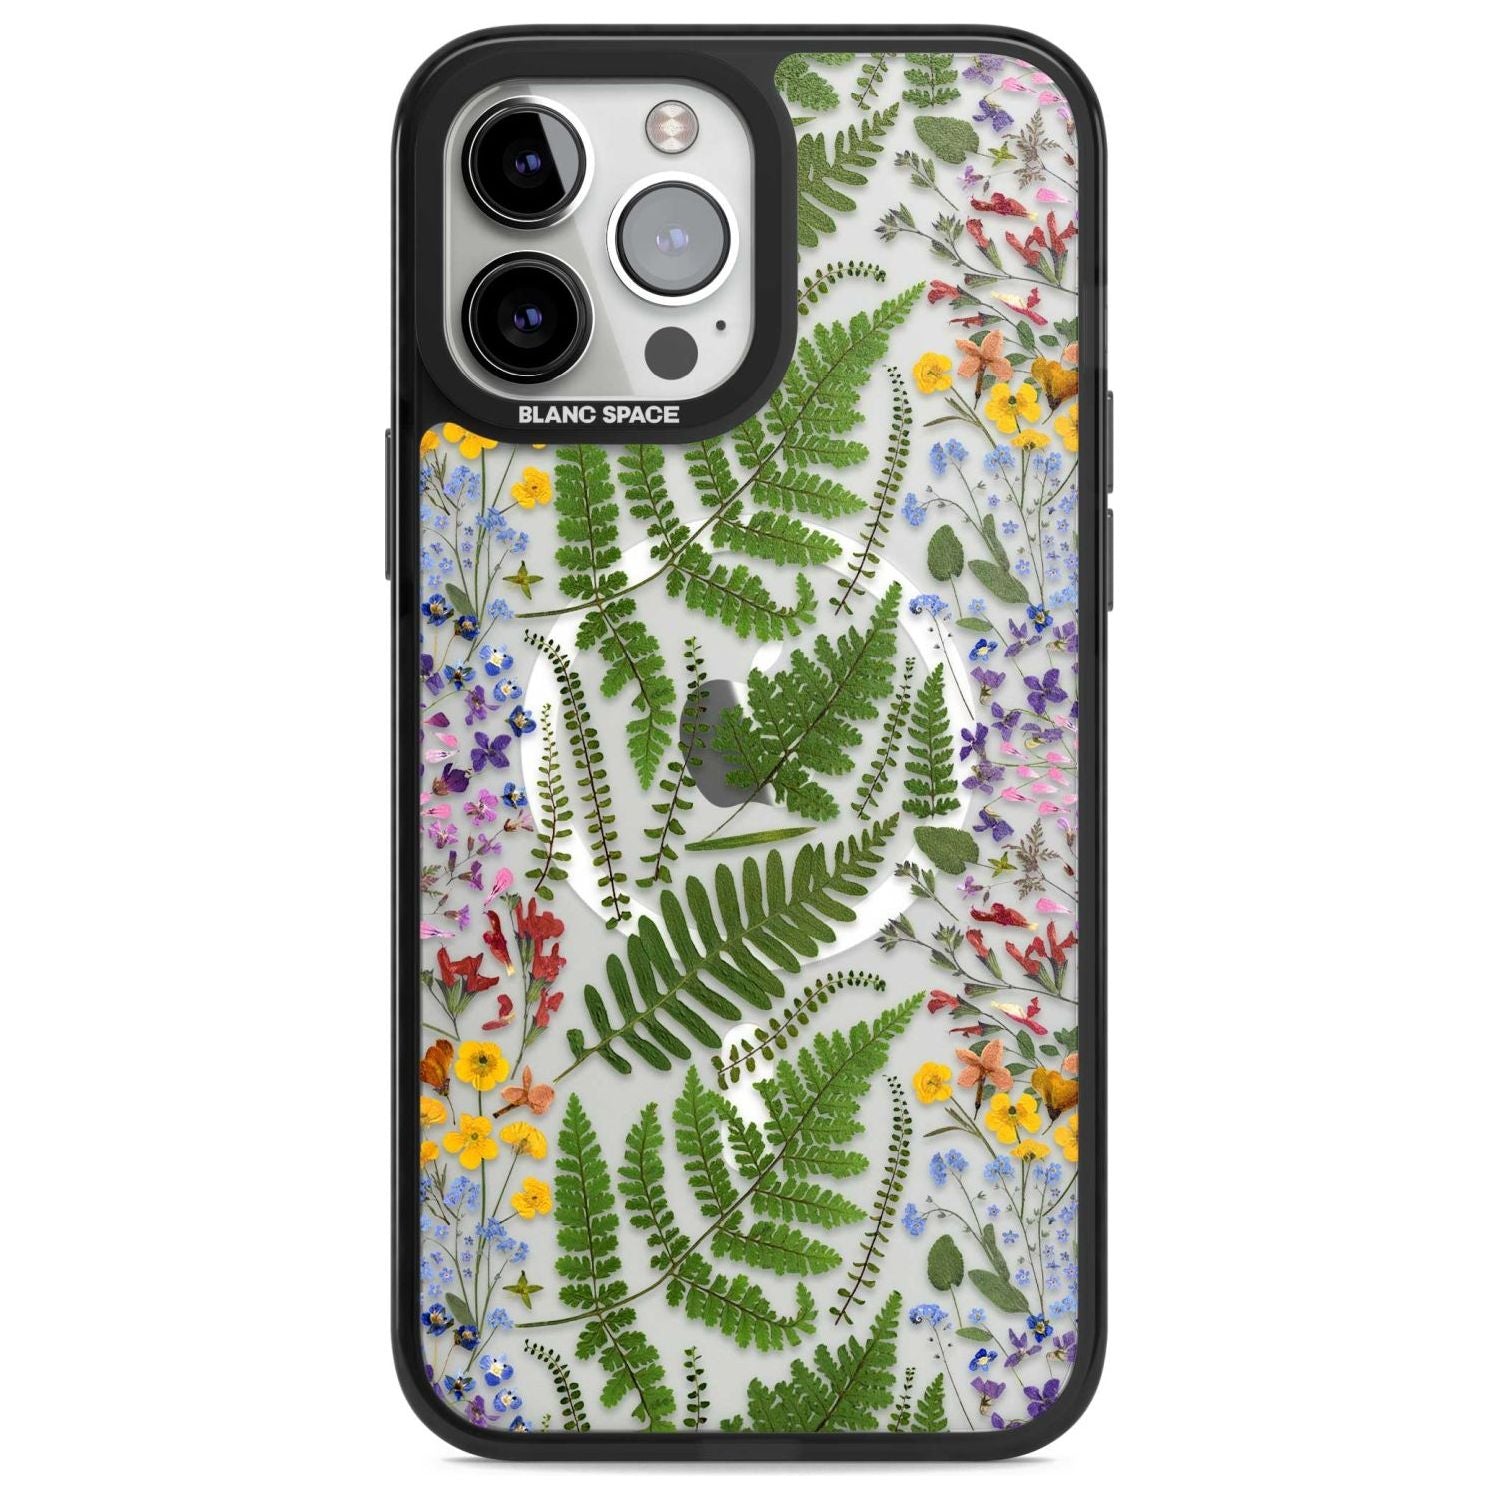 Busy Floral and Fern Design Phone Case iPhone 13 Pro Max / Magsafe Black Impact Case Blanc Space